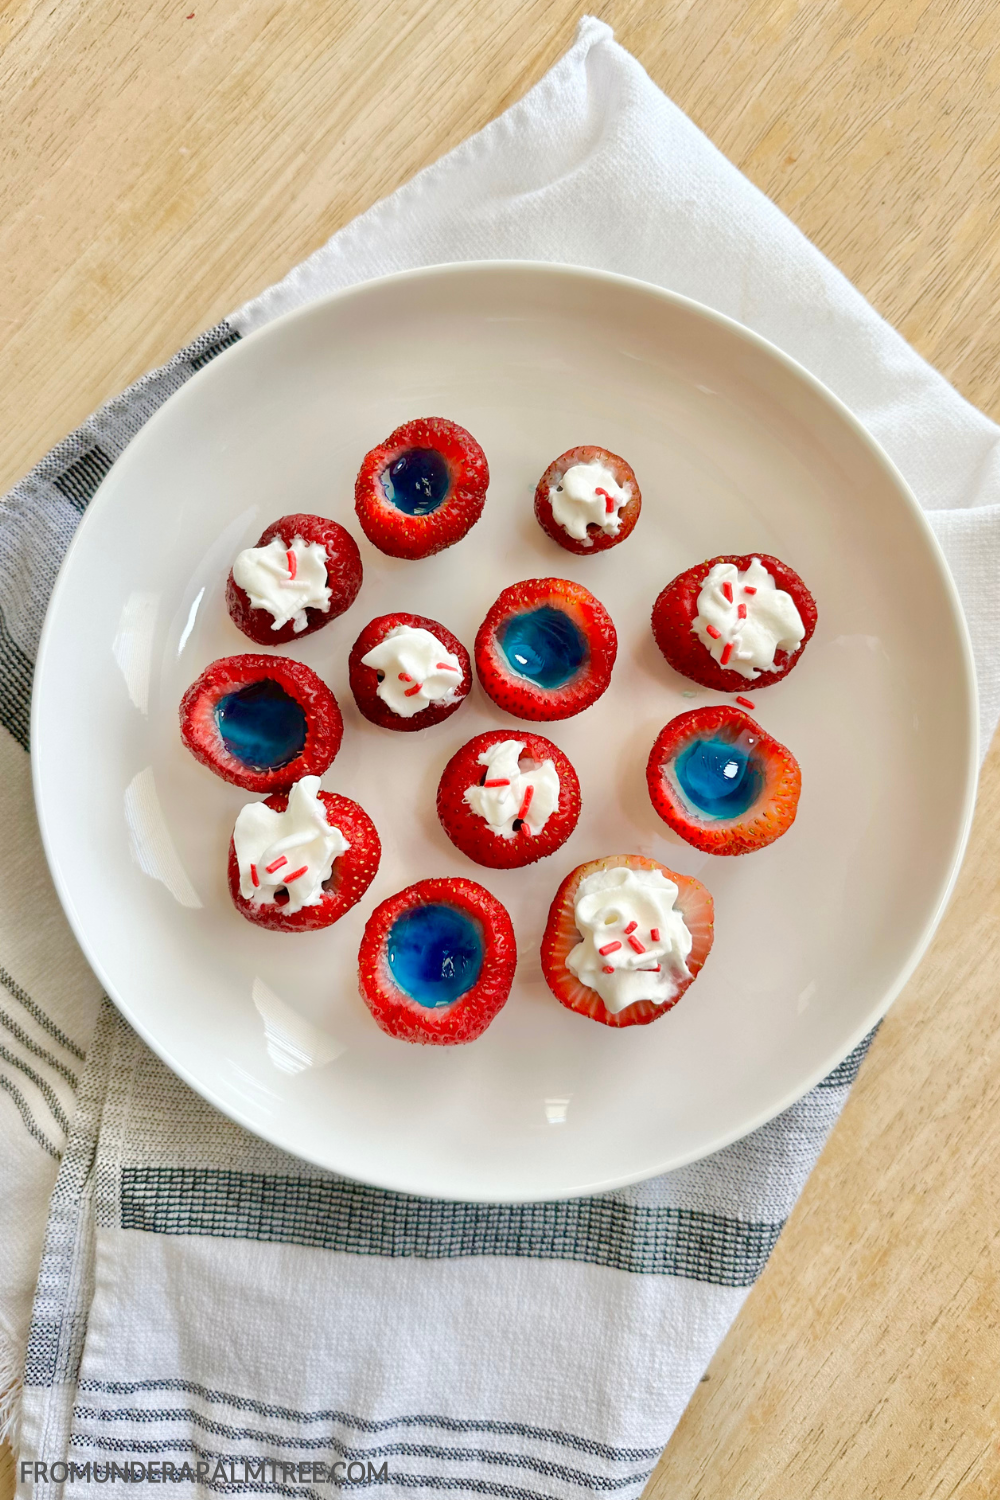 4th of july party apps | 4th of july snacks | fourth barbeque | fourth of july | fourth of july apps | fourth of july dessert | fourth of july party snacks | fourth of july recipe | fourth of july shots | fourth of july shots for kids | fourth of july snacks | fun summer snacks | jello bites | jello shots | kid friendly shots | kids snacks | non alcoholic jello shots | non alcoholic shots | party snacks | picnic food | picnic snacks for kids | 4th of july recipe | red white & blue strawberry jello bites | red white & blue strawberry jello shots | red white and blue jello shots | red white and blue non alcoholic jello shots | red white and blue shots | strawberries stuffed with jello | t strawberry jello bites for kids | strawberry snacks | summer snacks | kid friendly snacks | red white and blue strawberry jello bites with vanilla | red white and blue strawberry jello bites with cream cheese | red white and blue strawberry jello bites with cool | red white and blue jello shots | red white and blue Jello salad | patriotic foods | patriotic snacks | patriotic themed foods | patriotic themed apps | patriotic themed desserts | patriotic themed party foods |